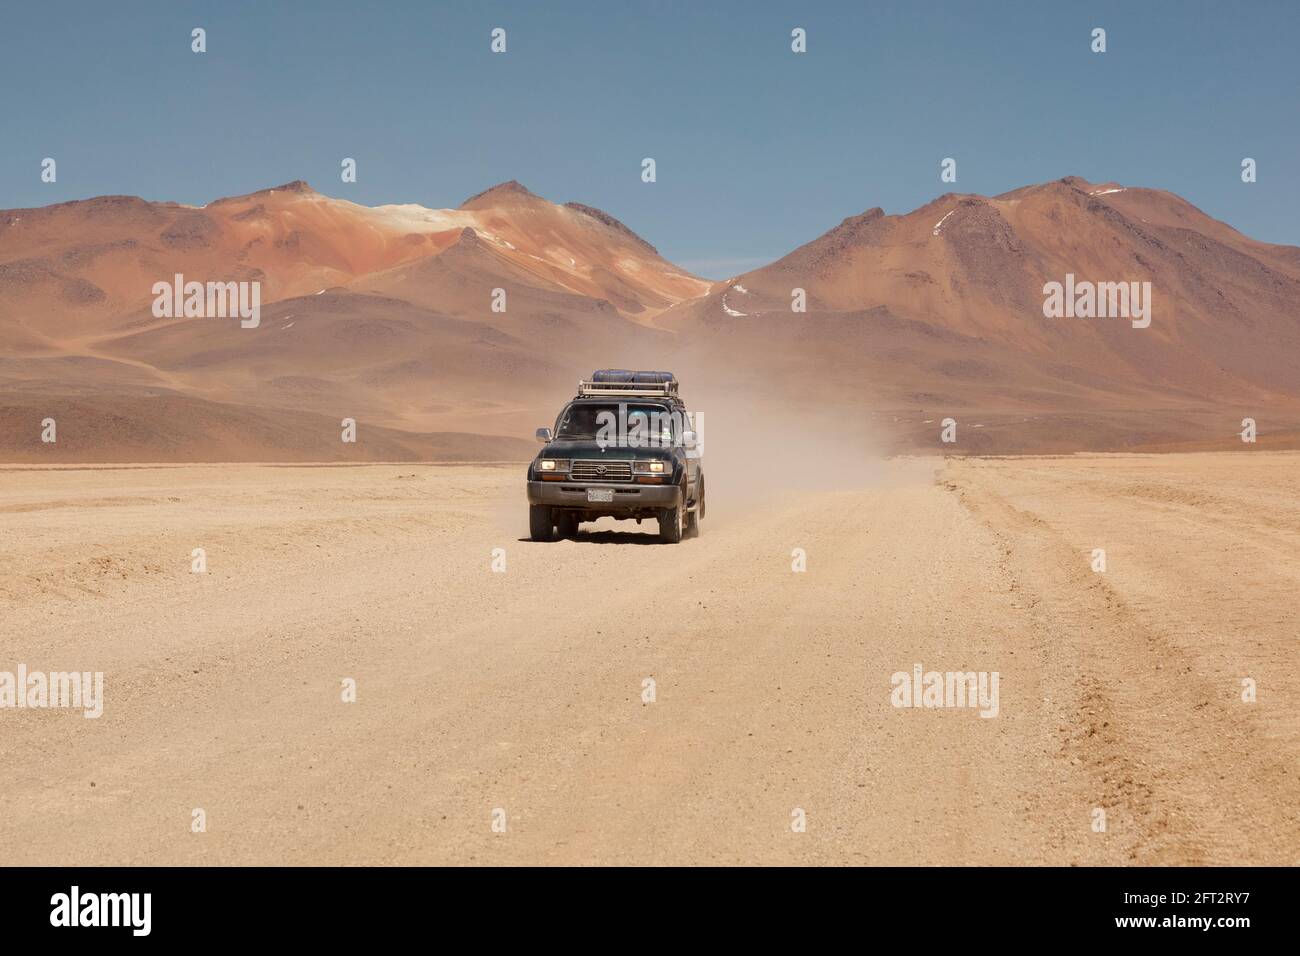 Against a backdrop of volcanoes, a 4x4 off-road vehicle speeds across Bolivia's desert landscape on an overland tourist safari. Stock Photo